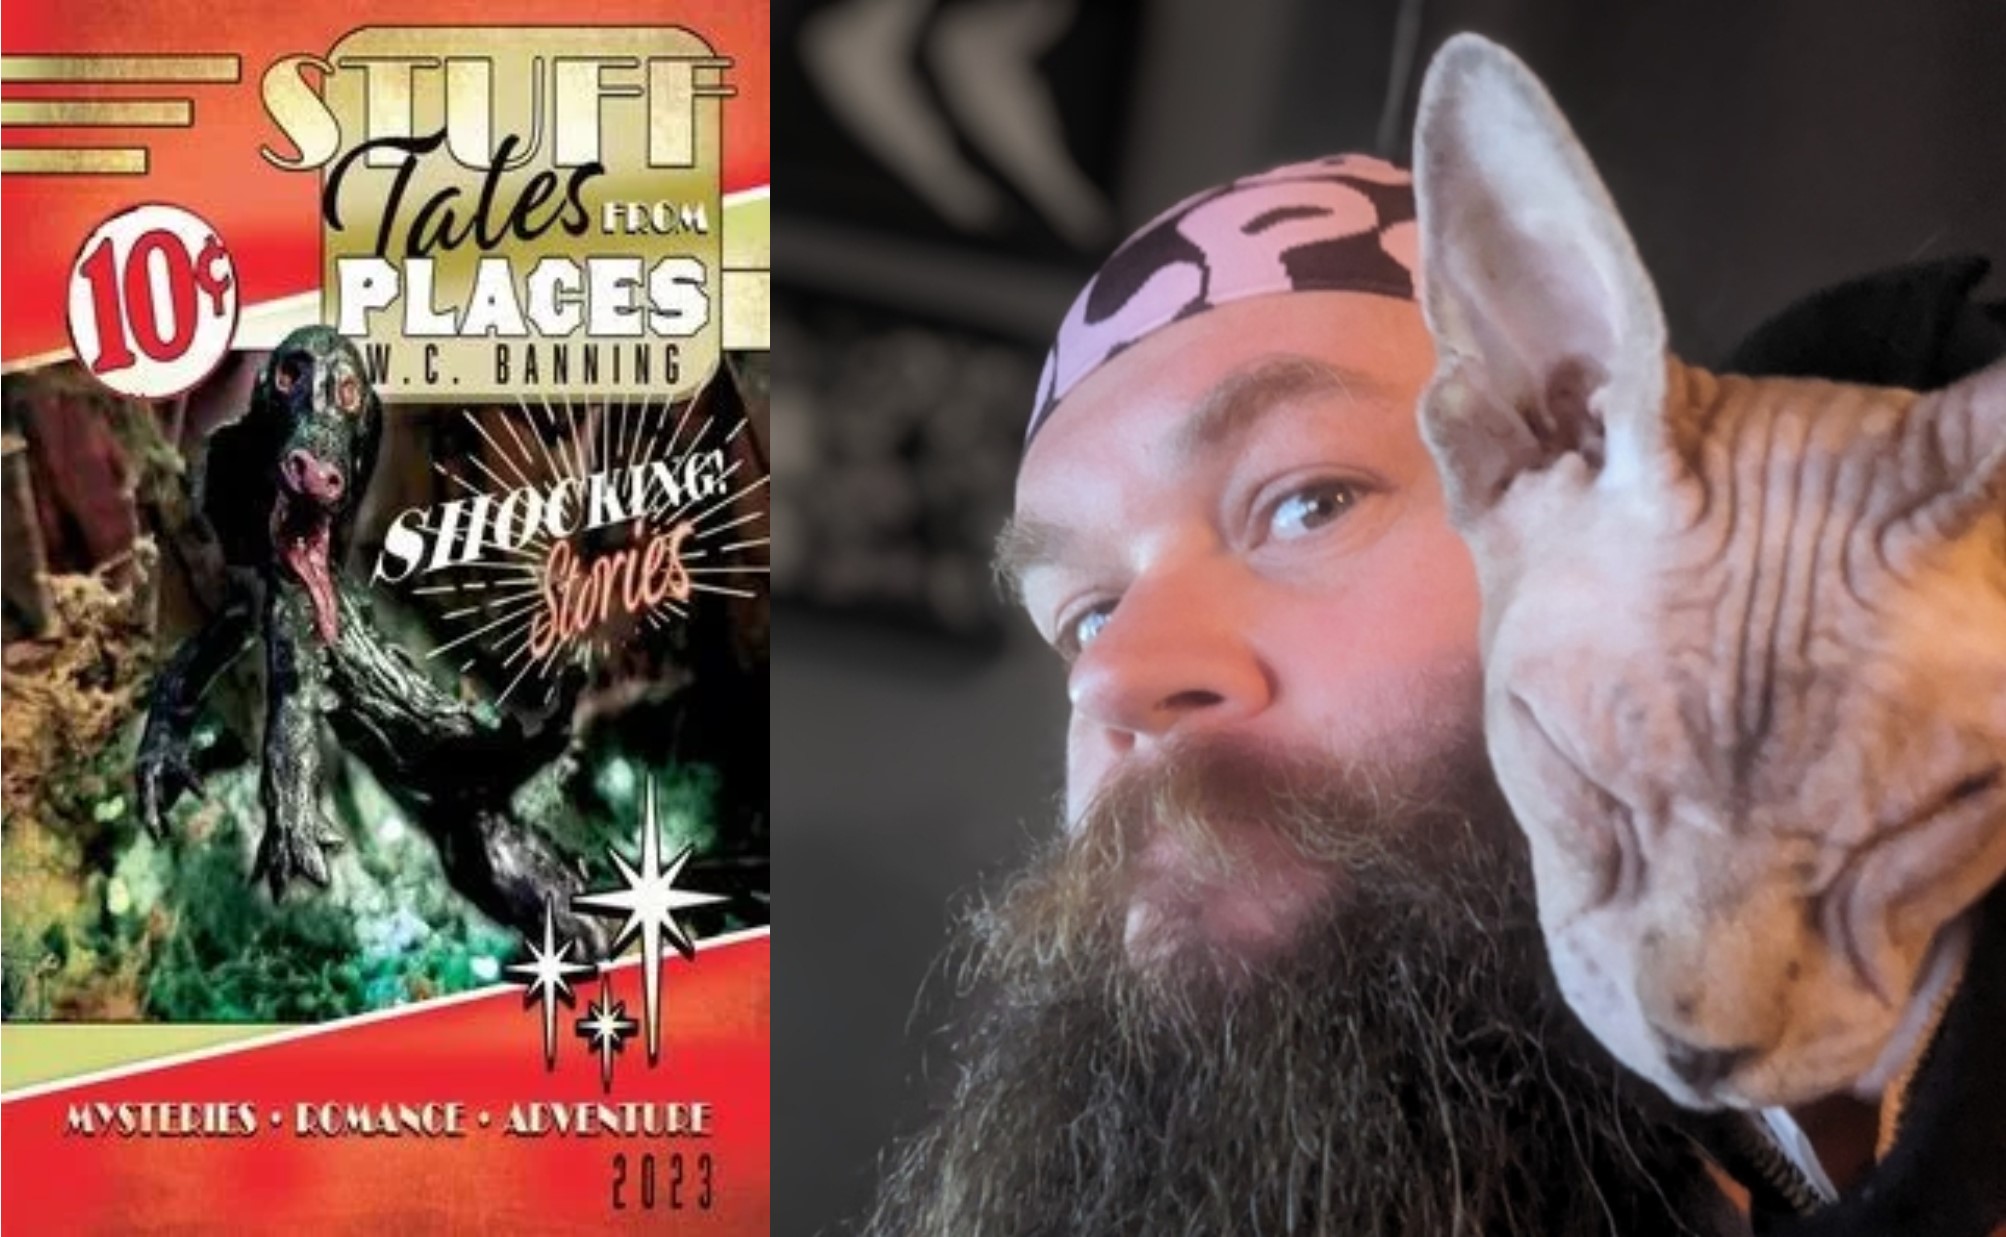 author WC Banning and his book and his hairless cat